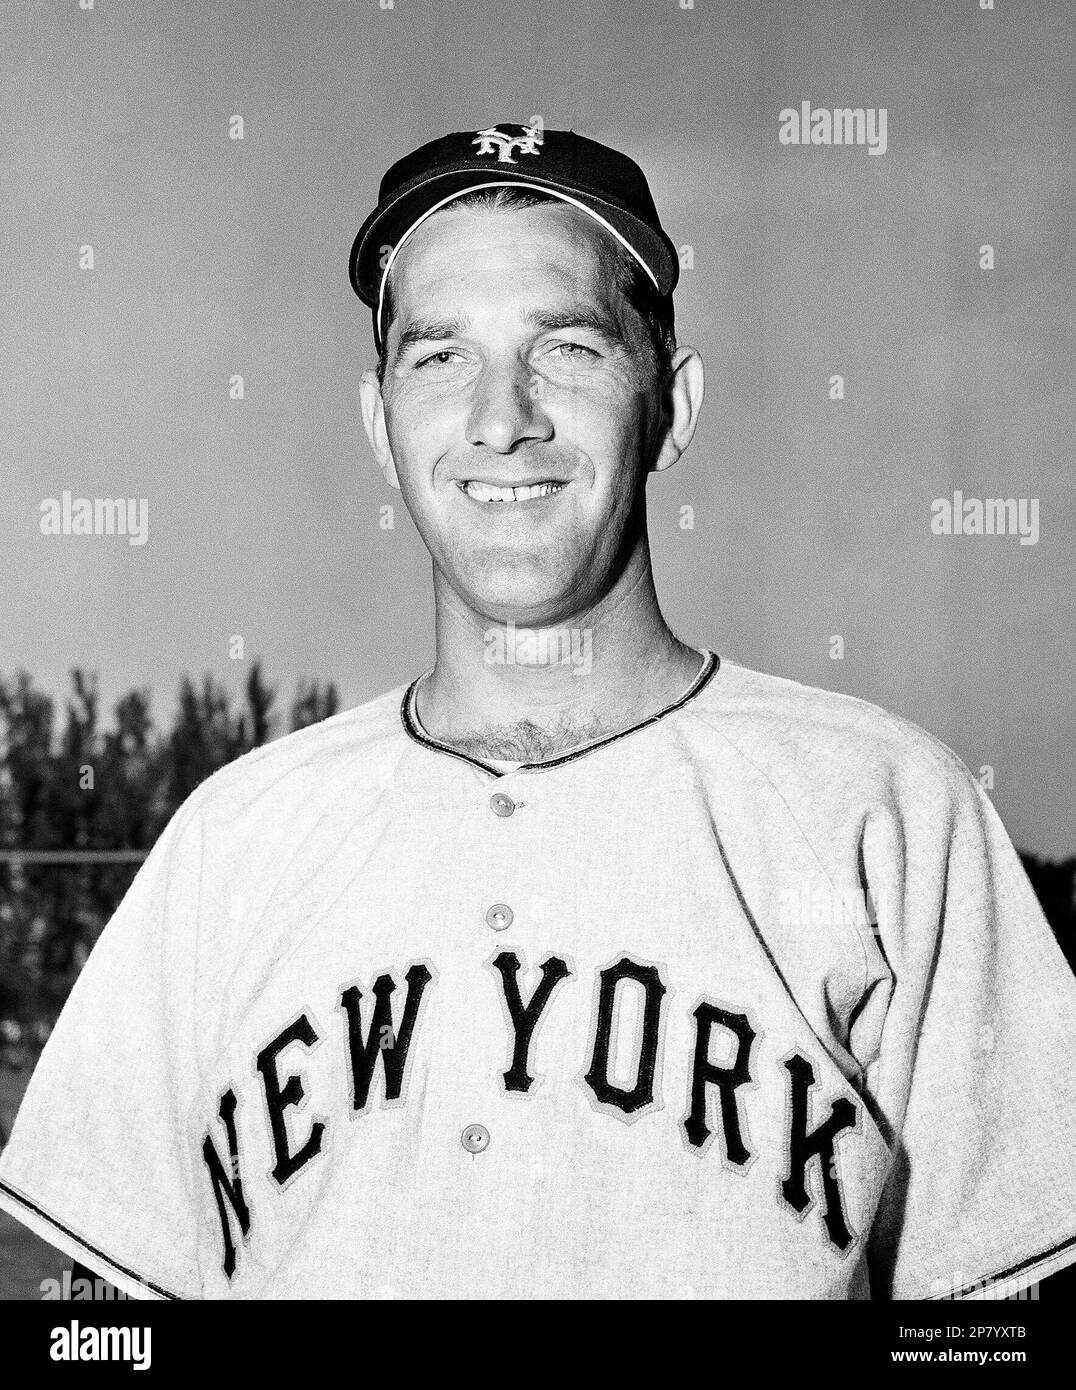 FILE - In this March 1951 file photo, Larry Jansen, New York Giant  right-handed pitcher is shown in St. Petersburgh, Fla. Jansen, the winning  pitcher for the New York Giants in the